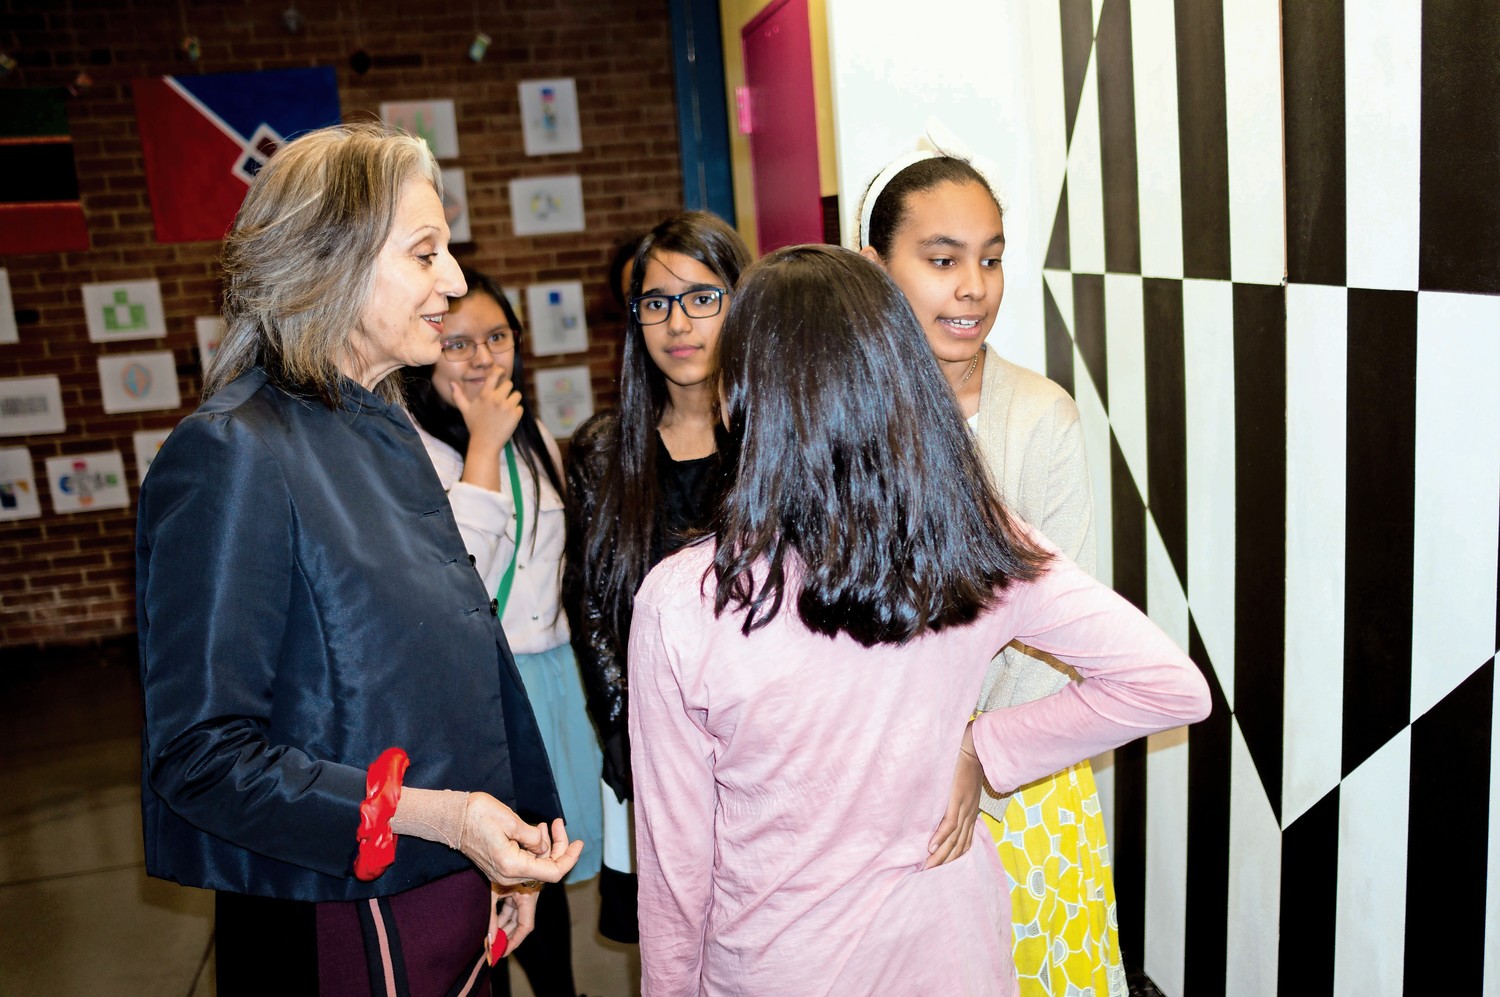 Ruth Lande Shuman, the founder of Publicolor, left, talks to students at M.S. 244 in front of a mural inspired by the work of Carmen Herrera. Publicolor worked closely with students at M.S. 244 to reproduce one of Herrera's paintings.